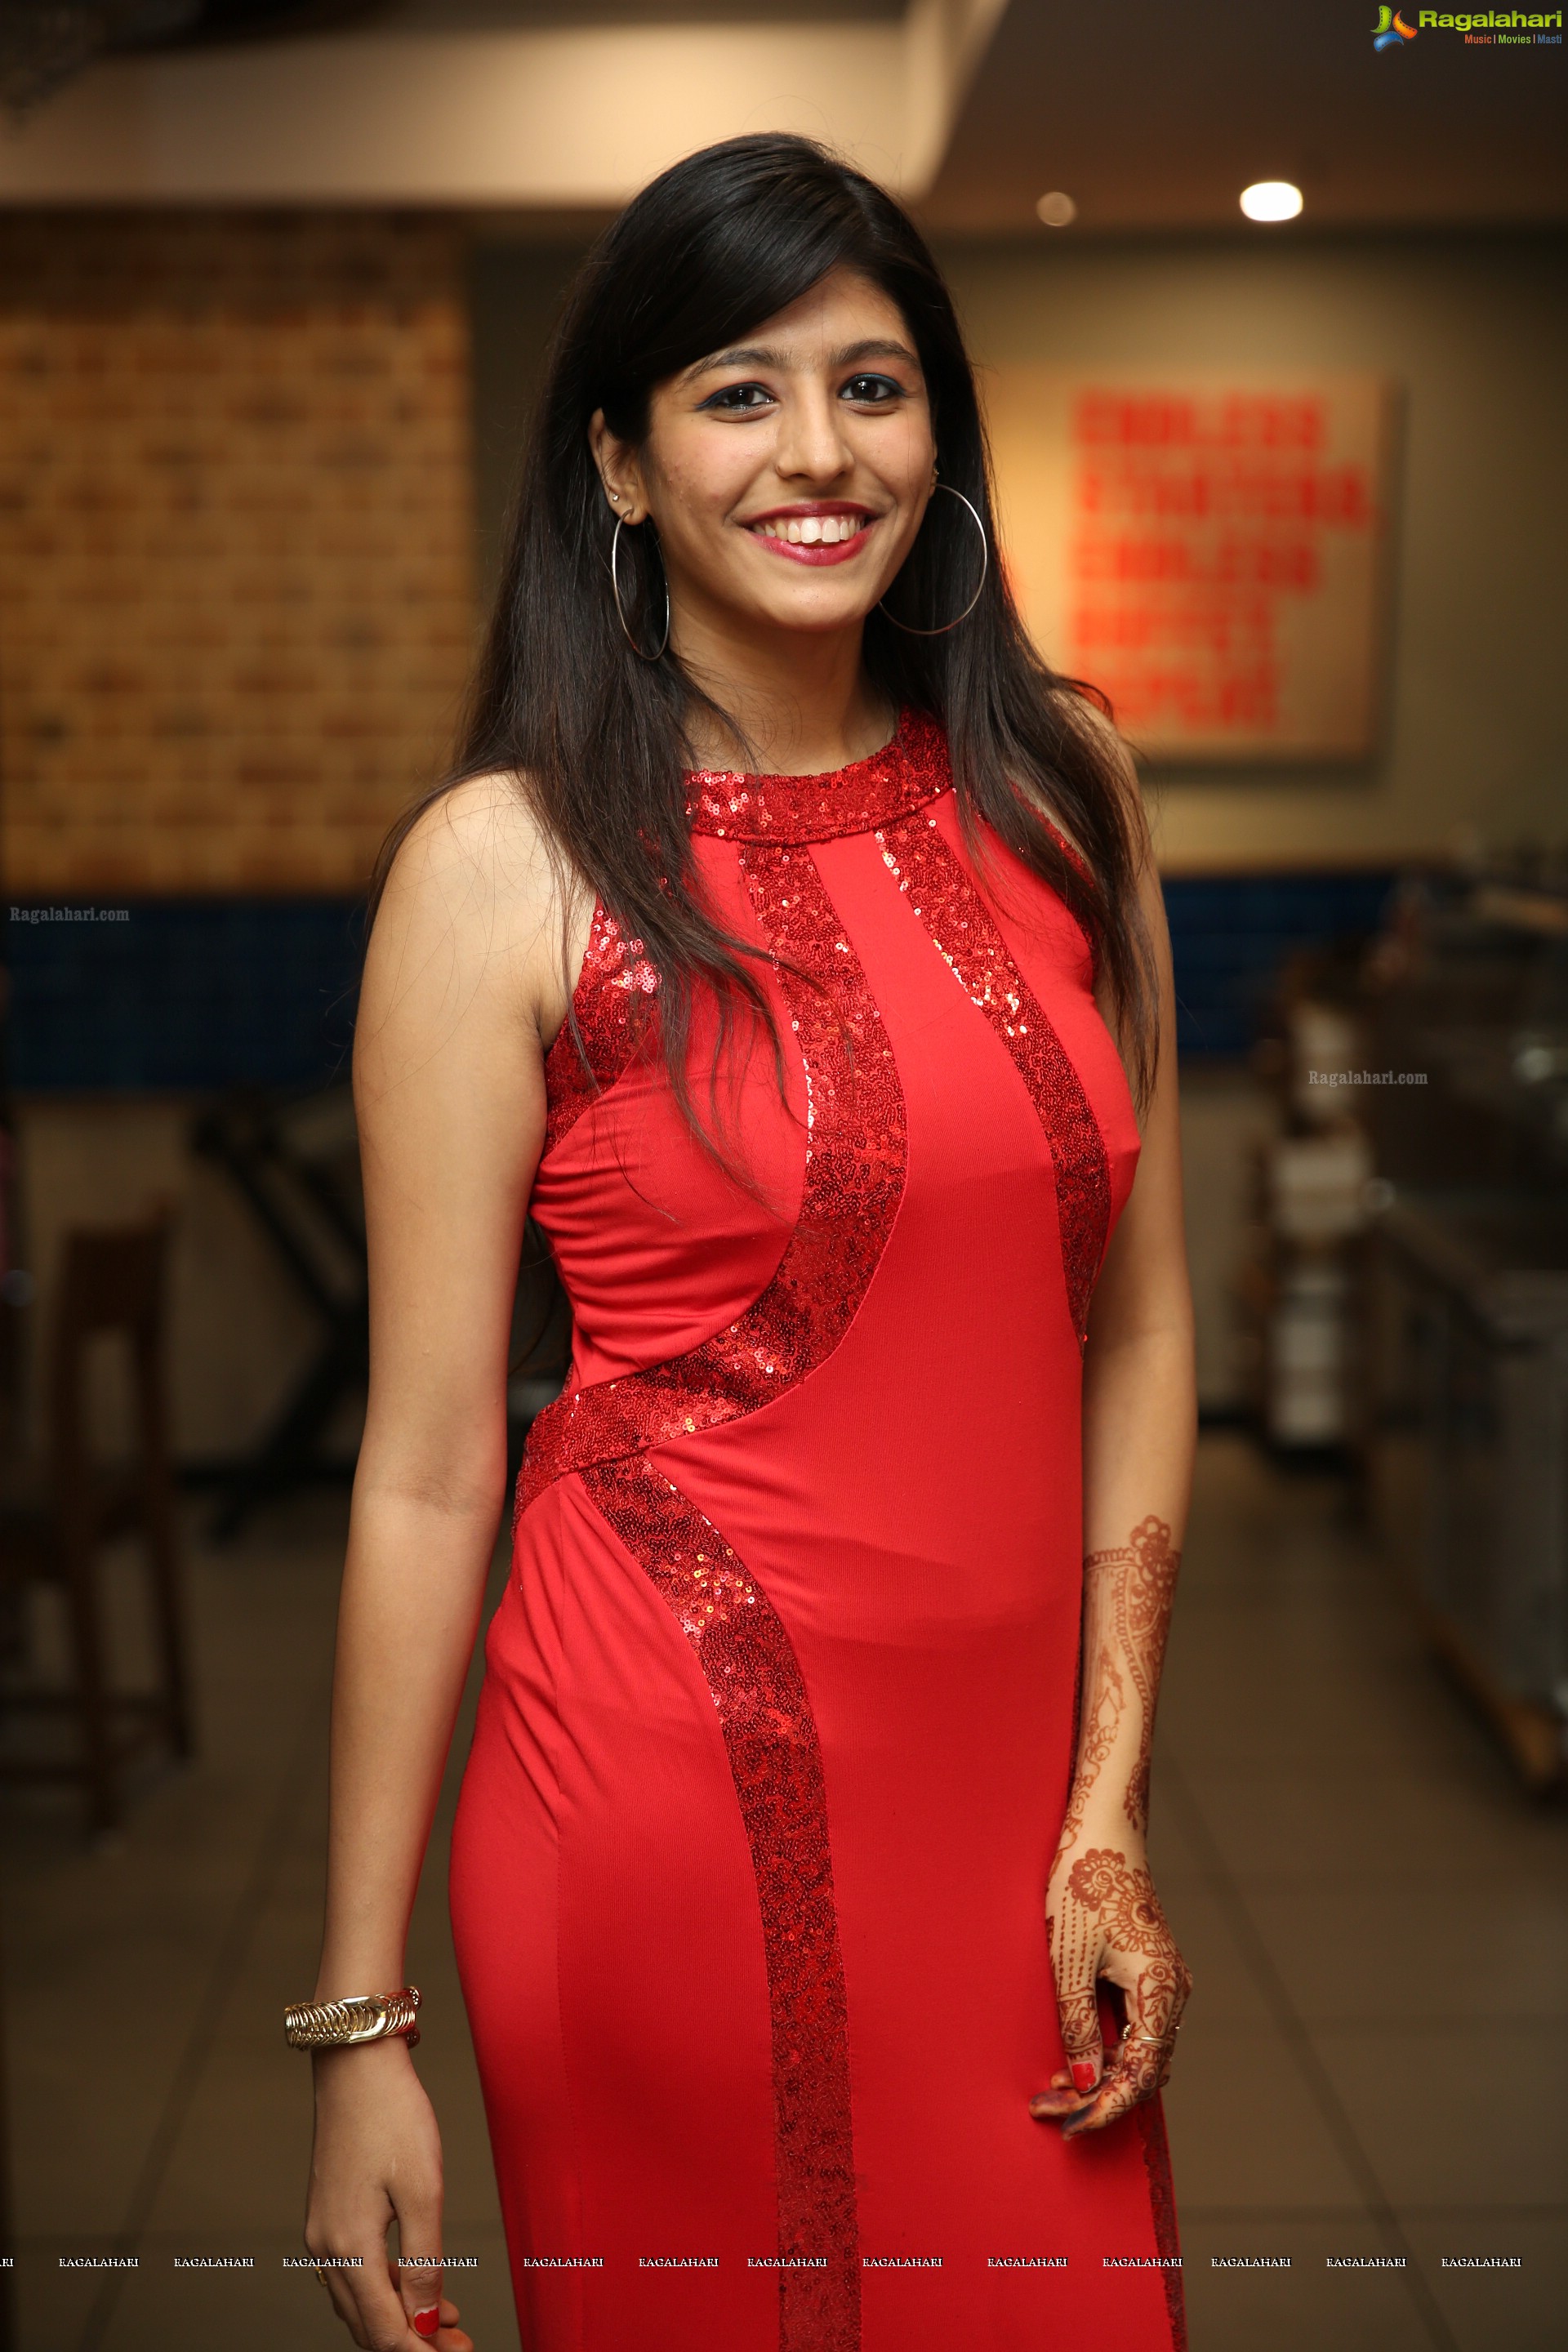 Harshada Kasat @ Barbeque Nation's ‘Let’s Chill! Fest’ - HD Gallery